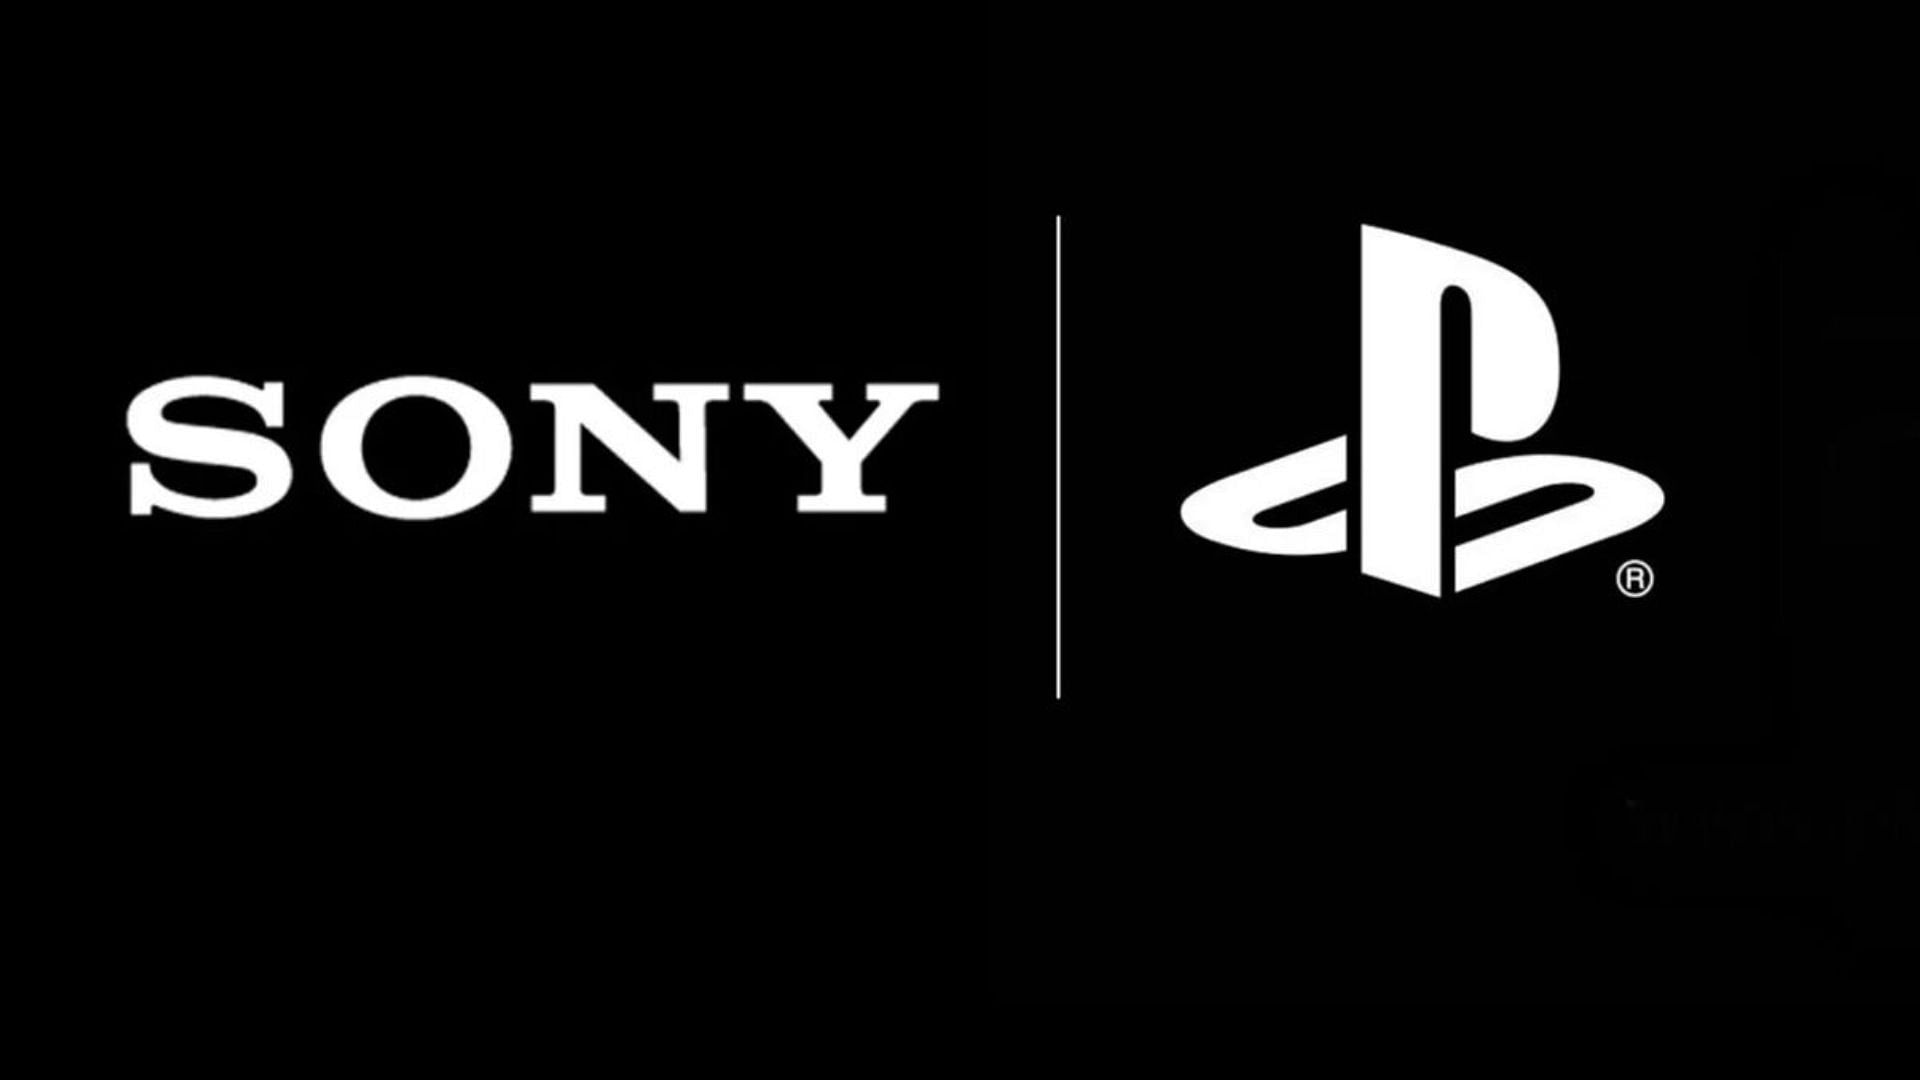 PlayStation employees personal data leaked after massive Sony data breach